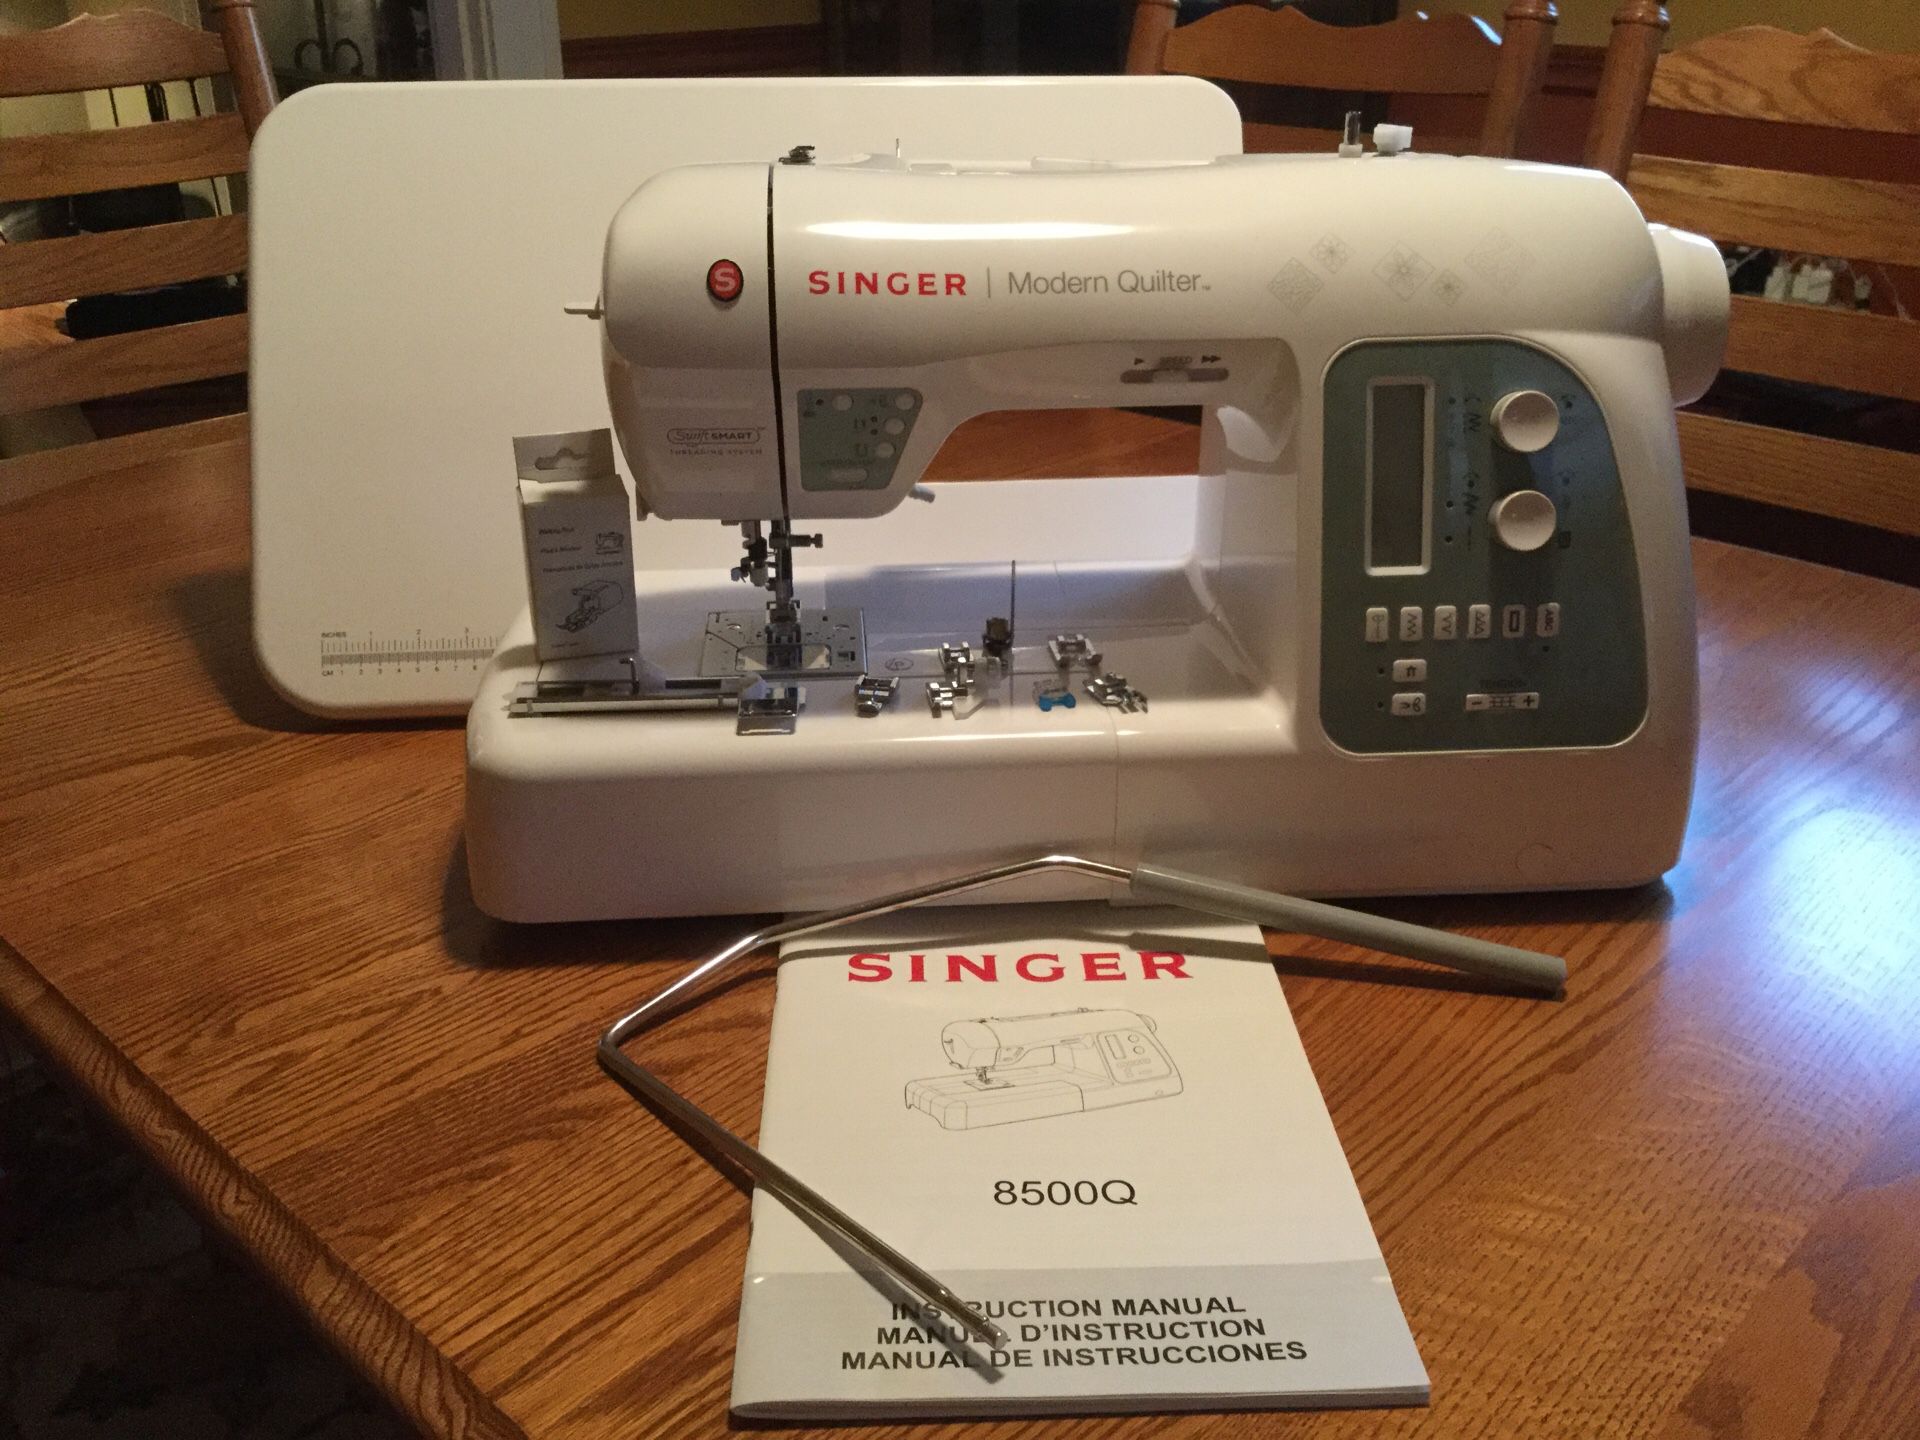 Singer 8500Q Modern Quilter with 215 stitches.